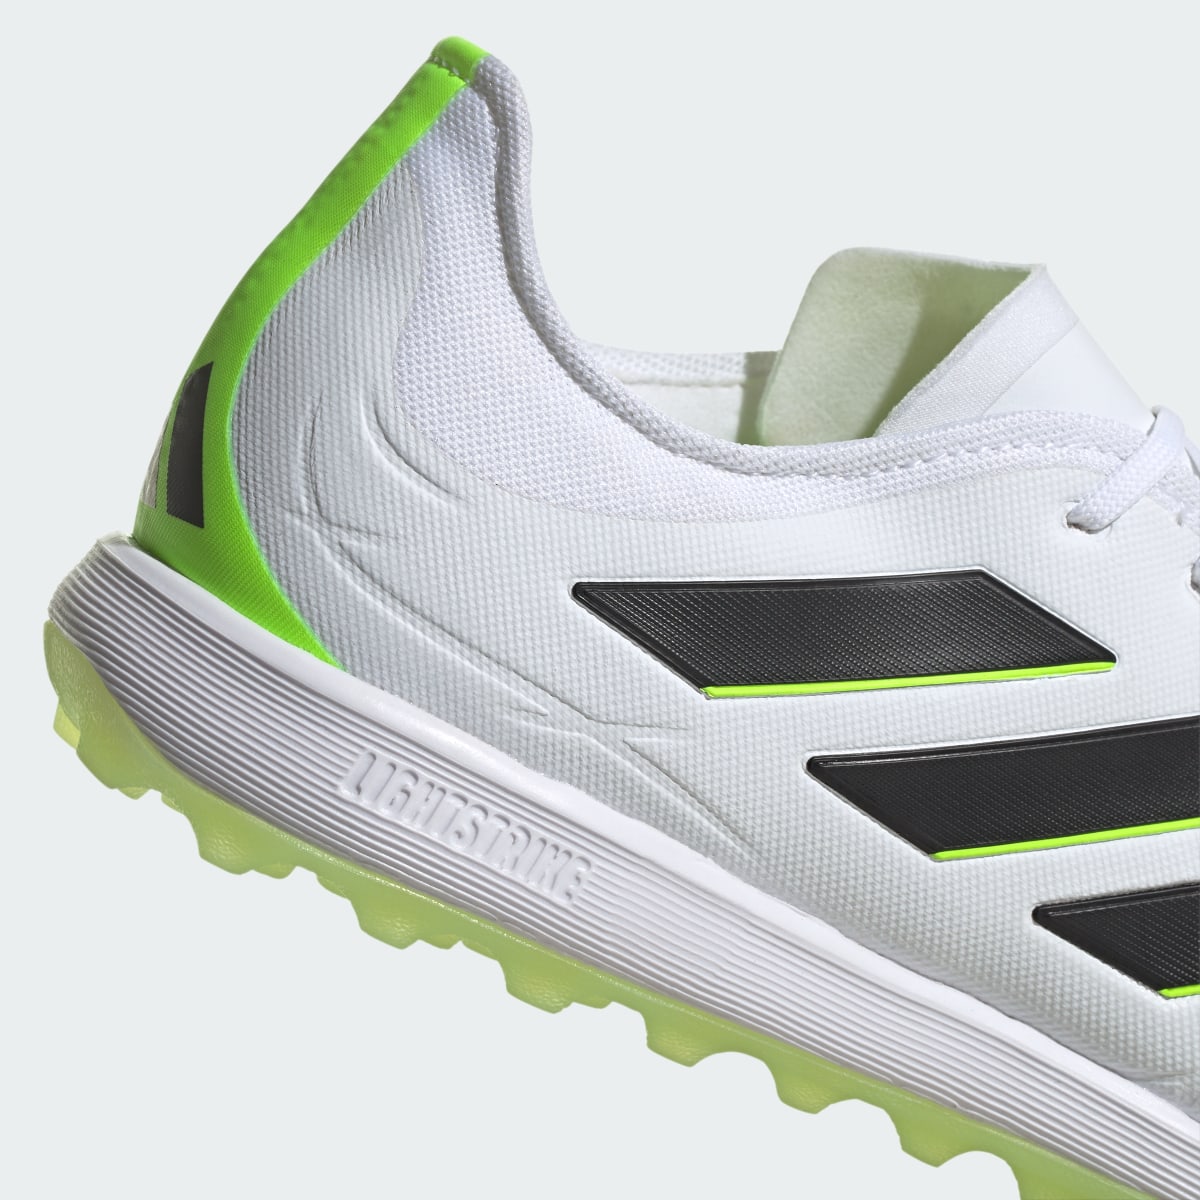 Adidas Copa Pure.1 Turf Boots. 12